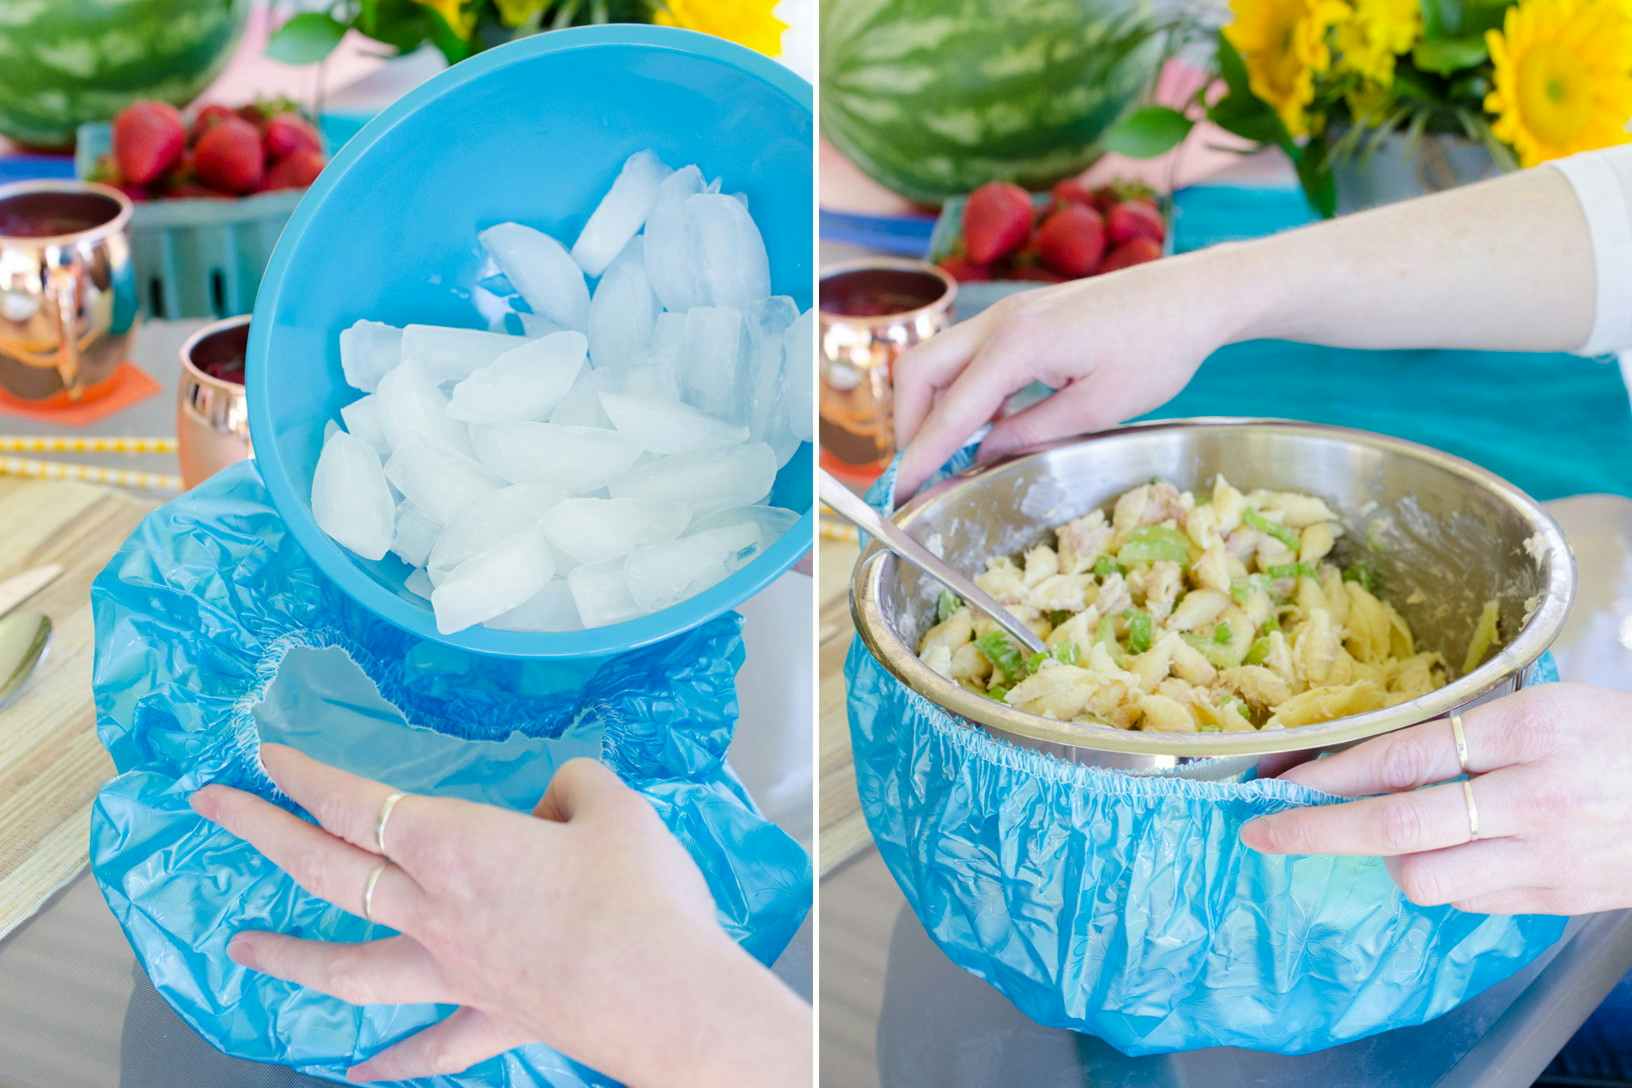 A person dumping a bowl of ice into a shower cap on a table, and placing a metal serving bowl of pasta salad into the shower cap.